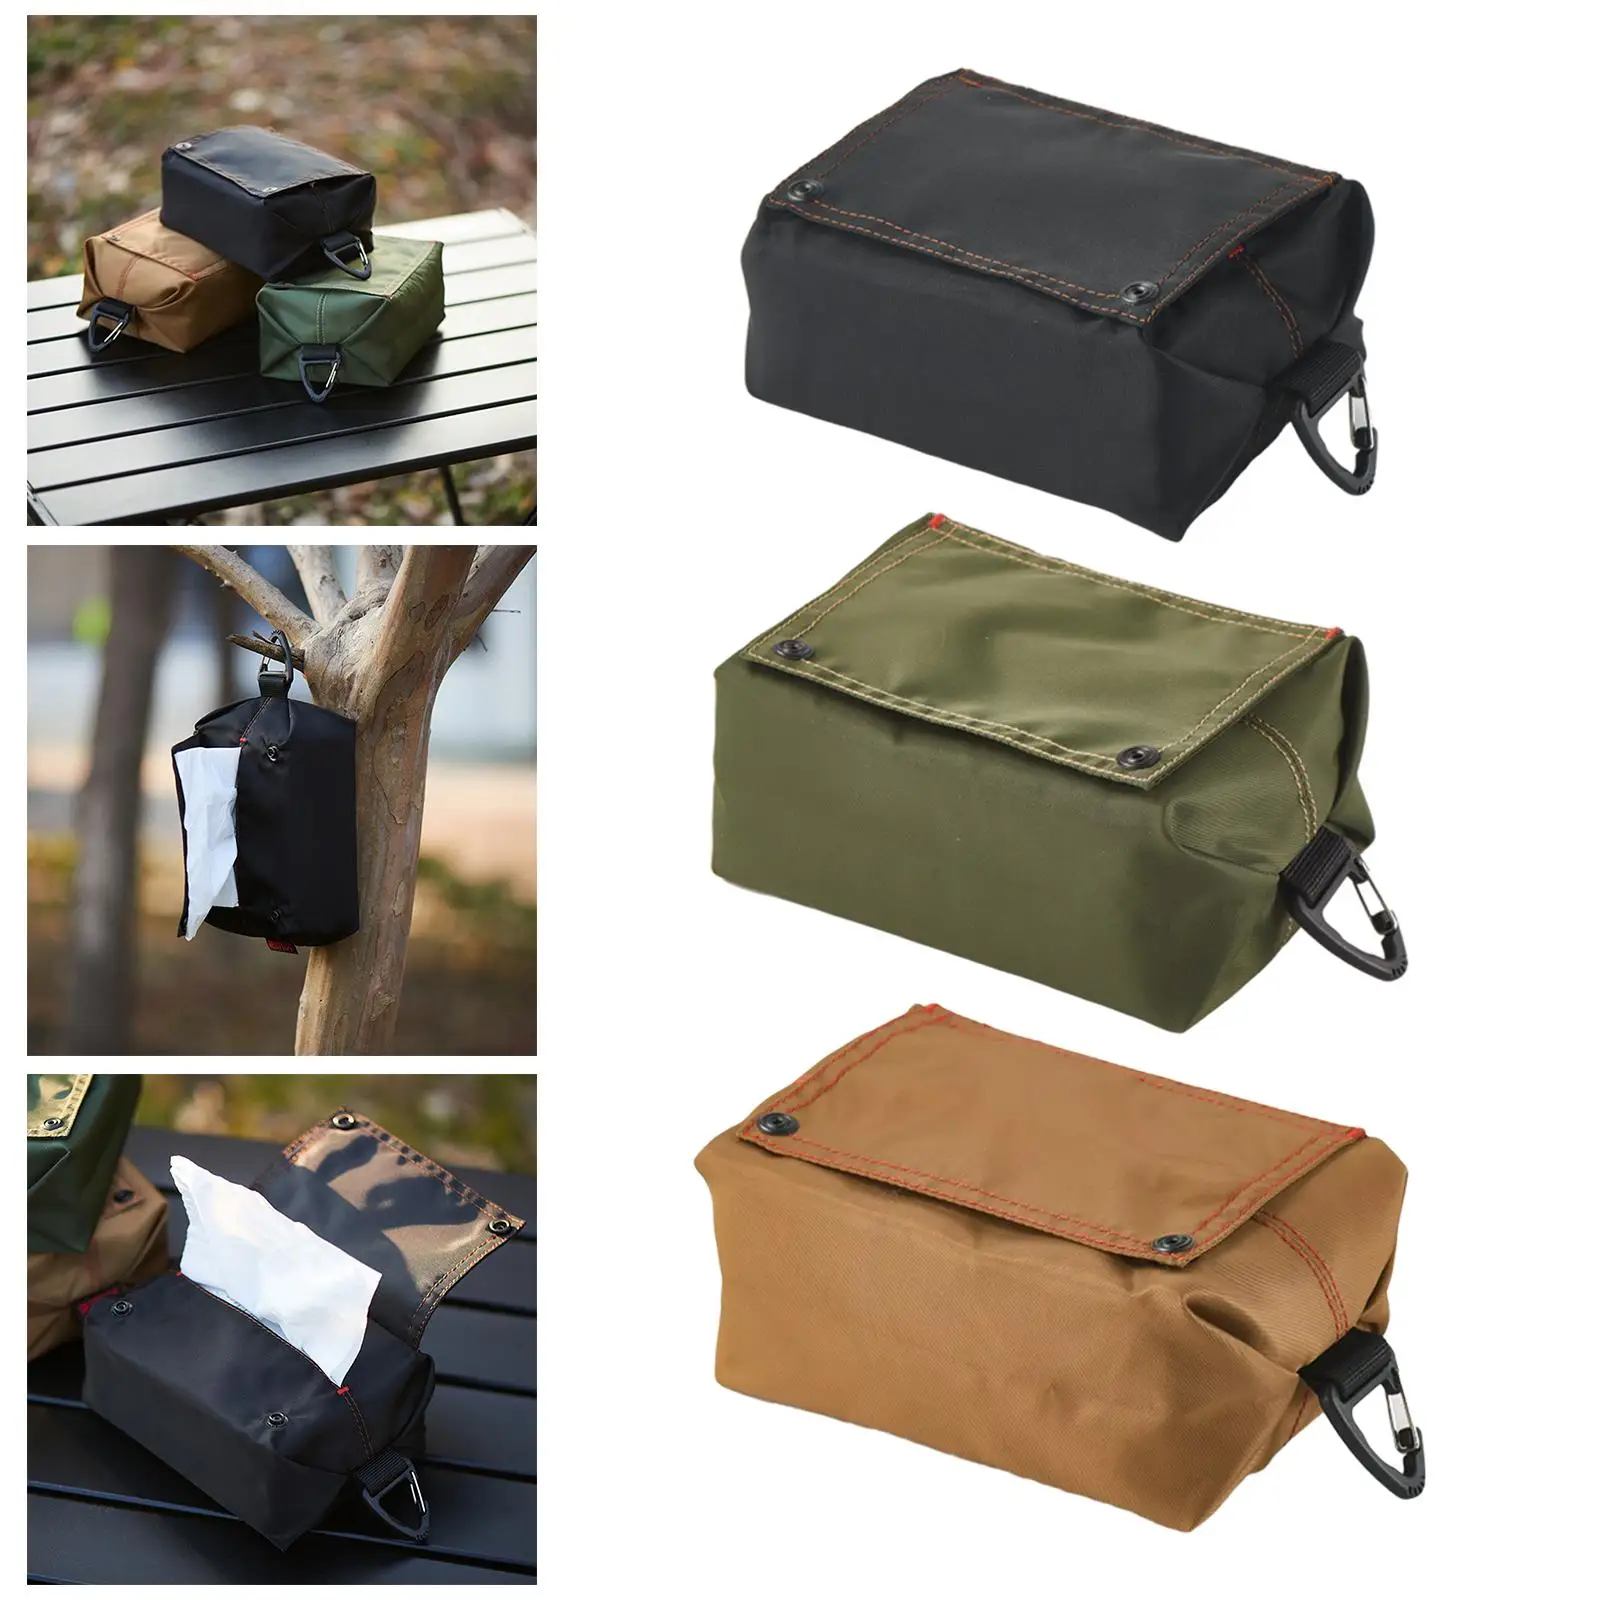 Waterproof Oxford Fabric Outdoor Camping Tissue Box Cover Kitchen Bathroom Office Home Car Travel Hiking Tent Napkin Paper Case